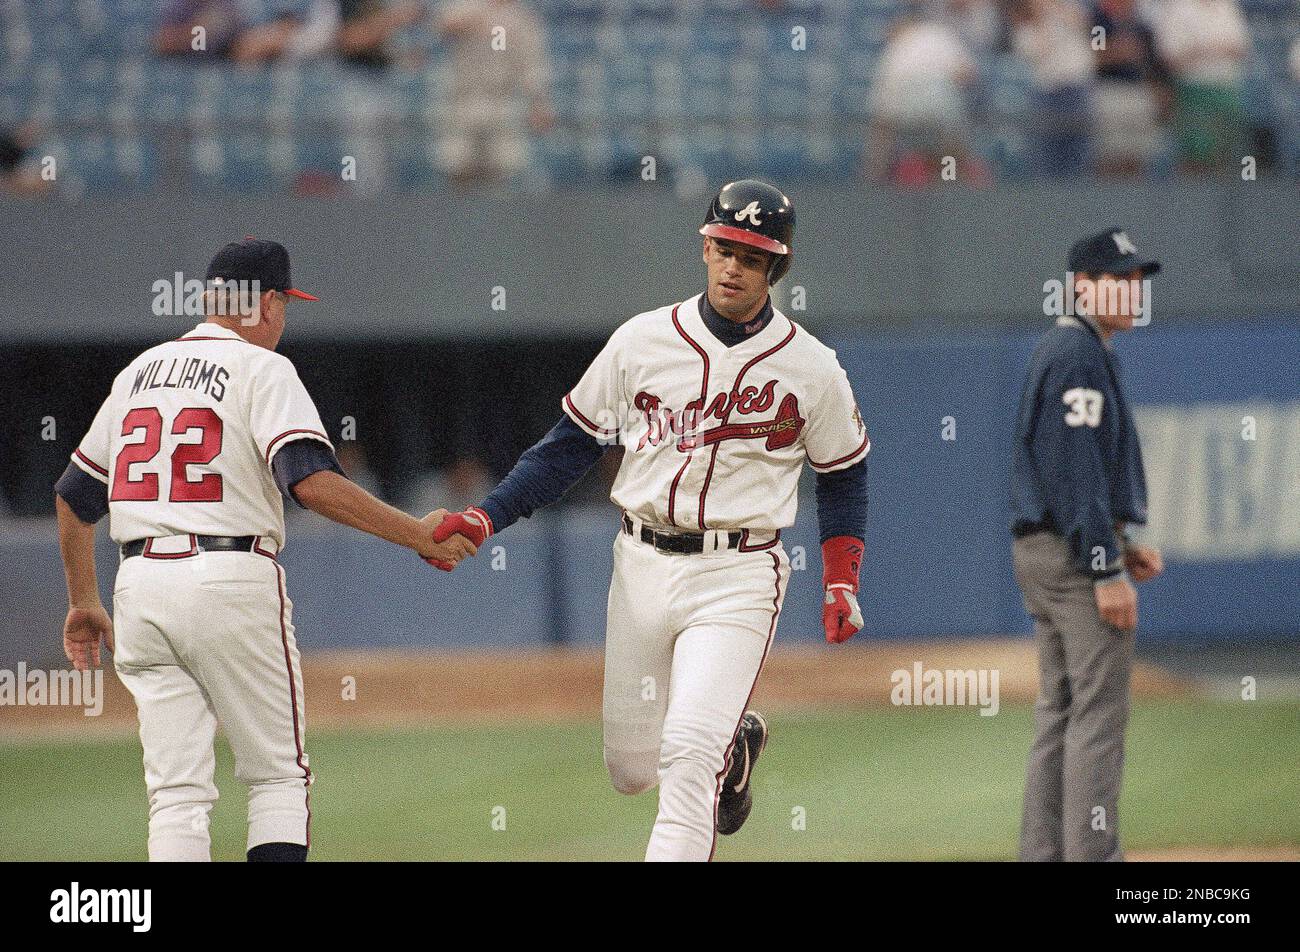 Javy Lopez to be inducted into Braves Hall of Fame